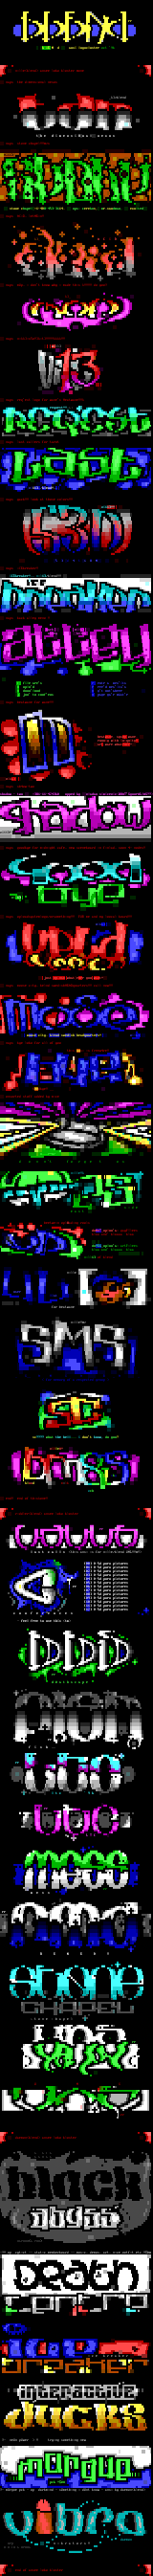 ansi logocluster 10/96 by multiple artists